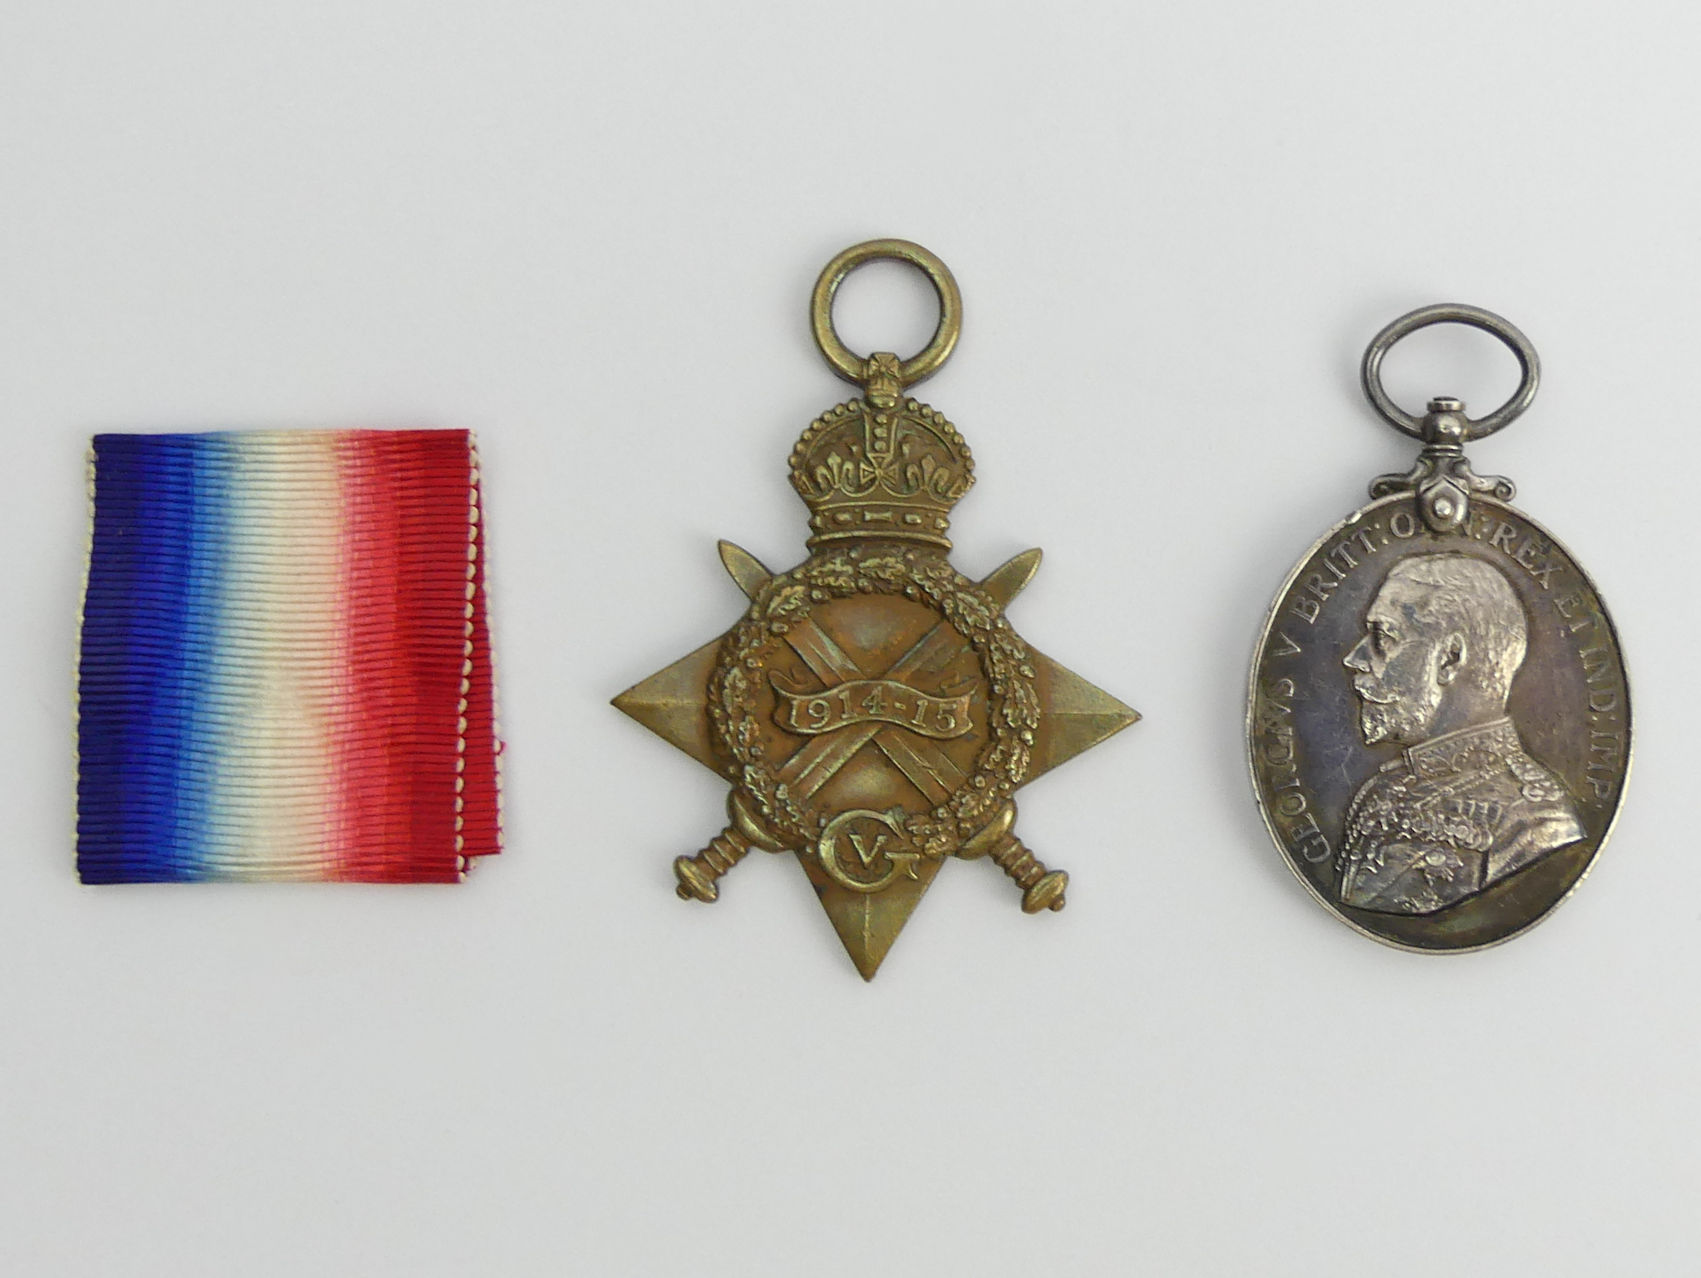 World War I star 2765 Pte Bunyan and efficiency medal to 200040 Pte W Bunyan S/Bedf:& Herts R.